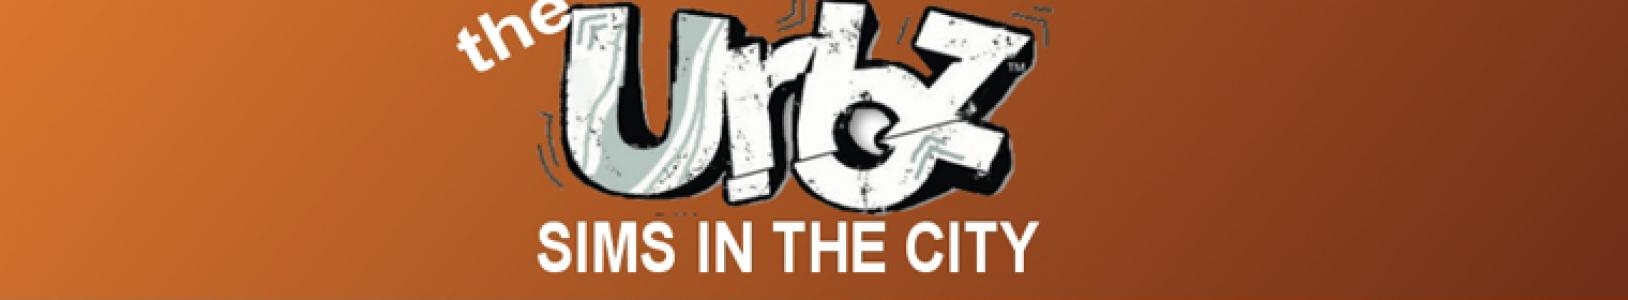 The Urbz: Sims in the City banner